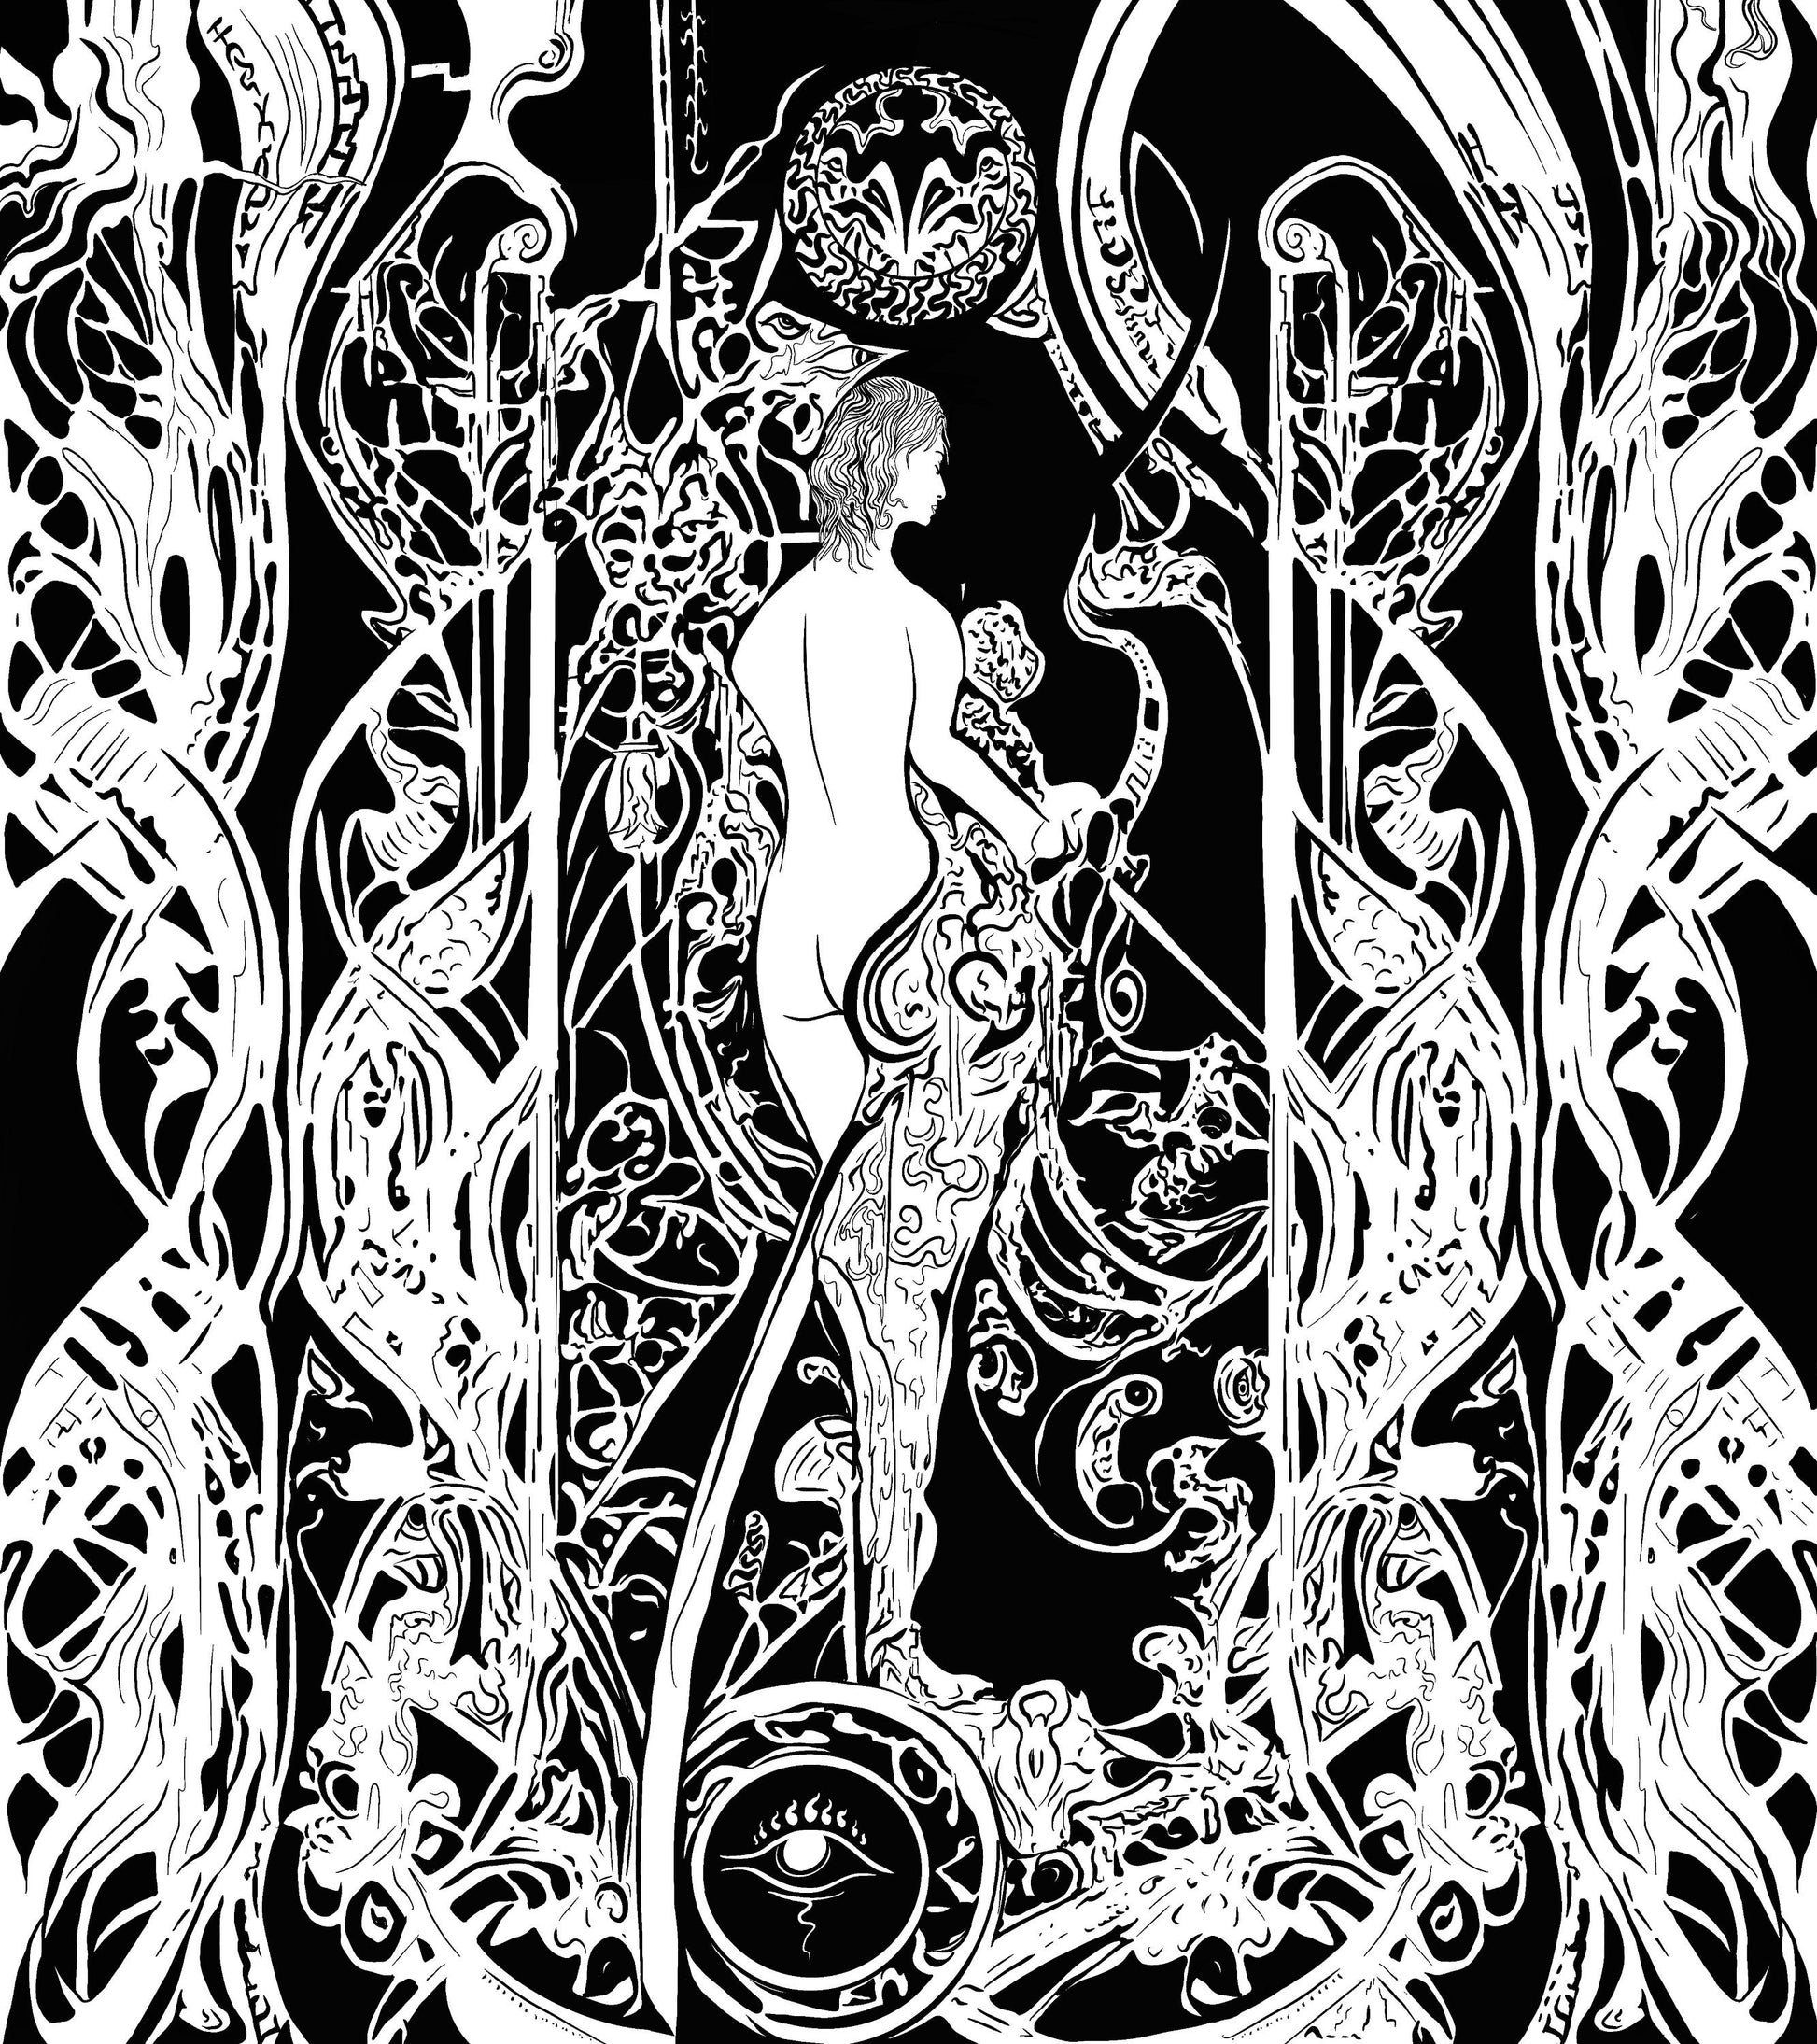  A black and white pen and ink art nouveau illustration of a woman surrounded by floral patterns and flowers